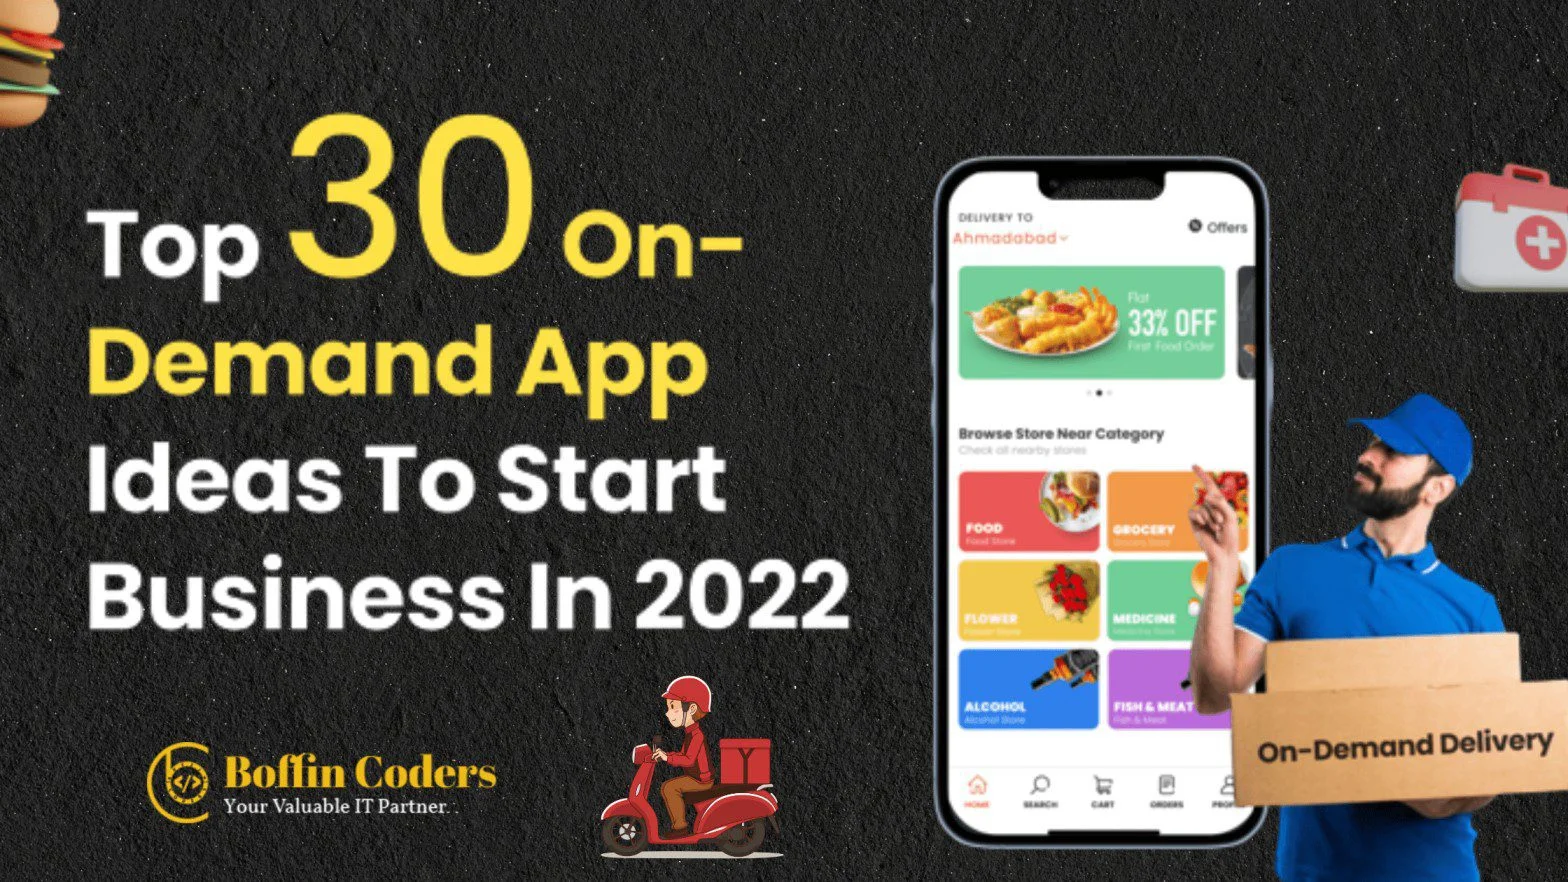 Top 30 On-Demand App Ideas to Start Business in 2022